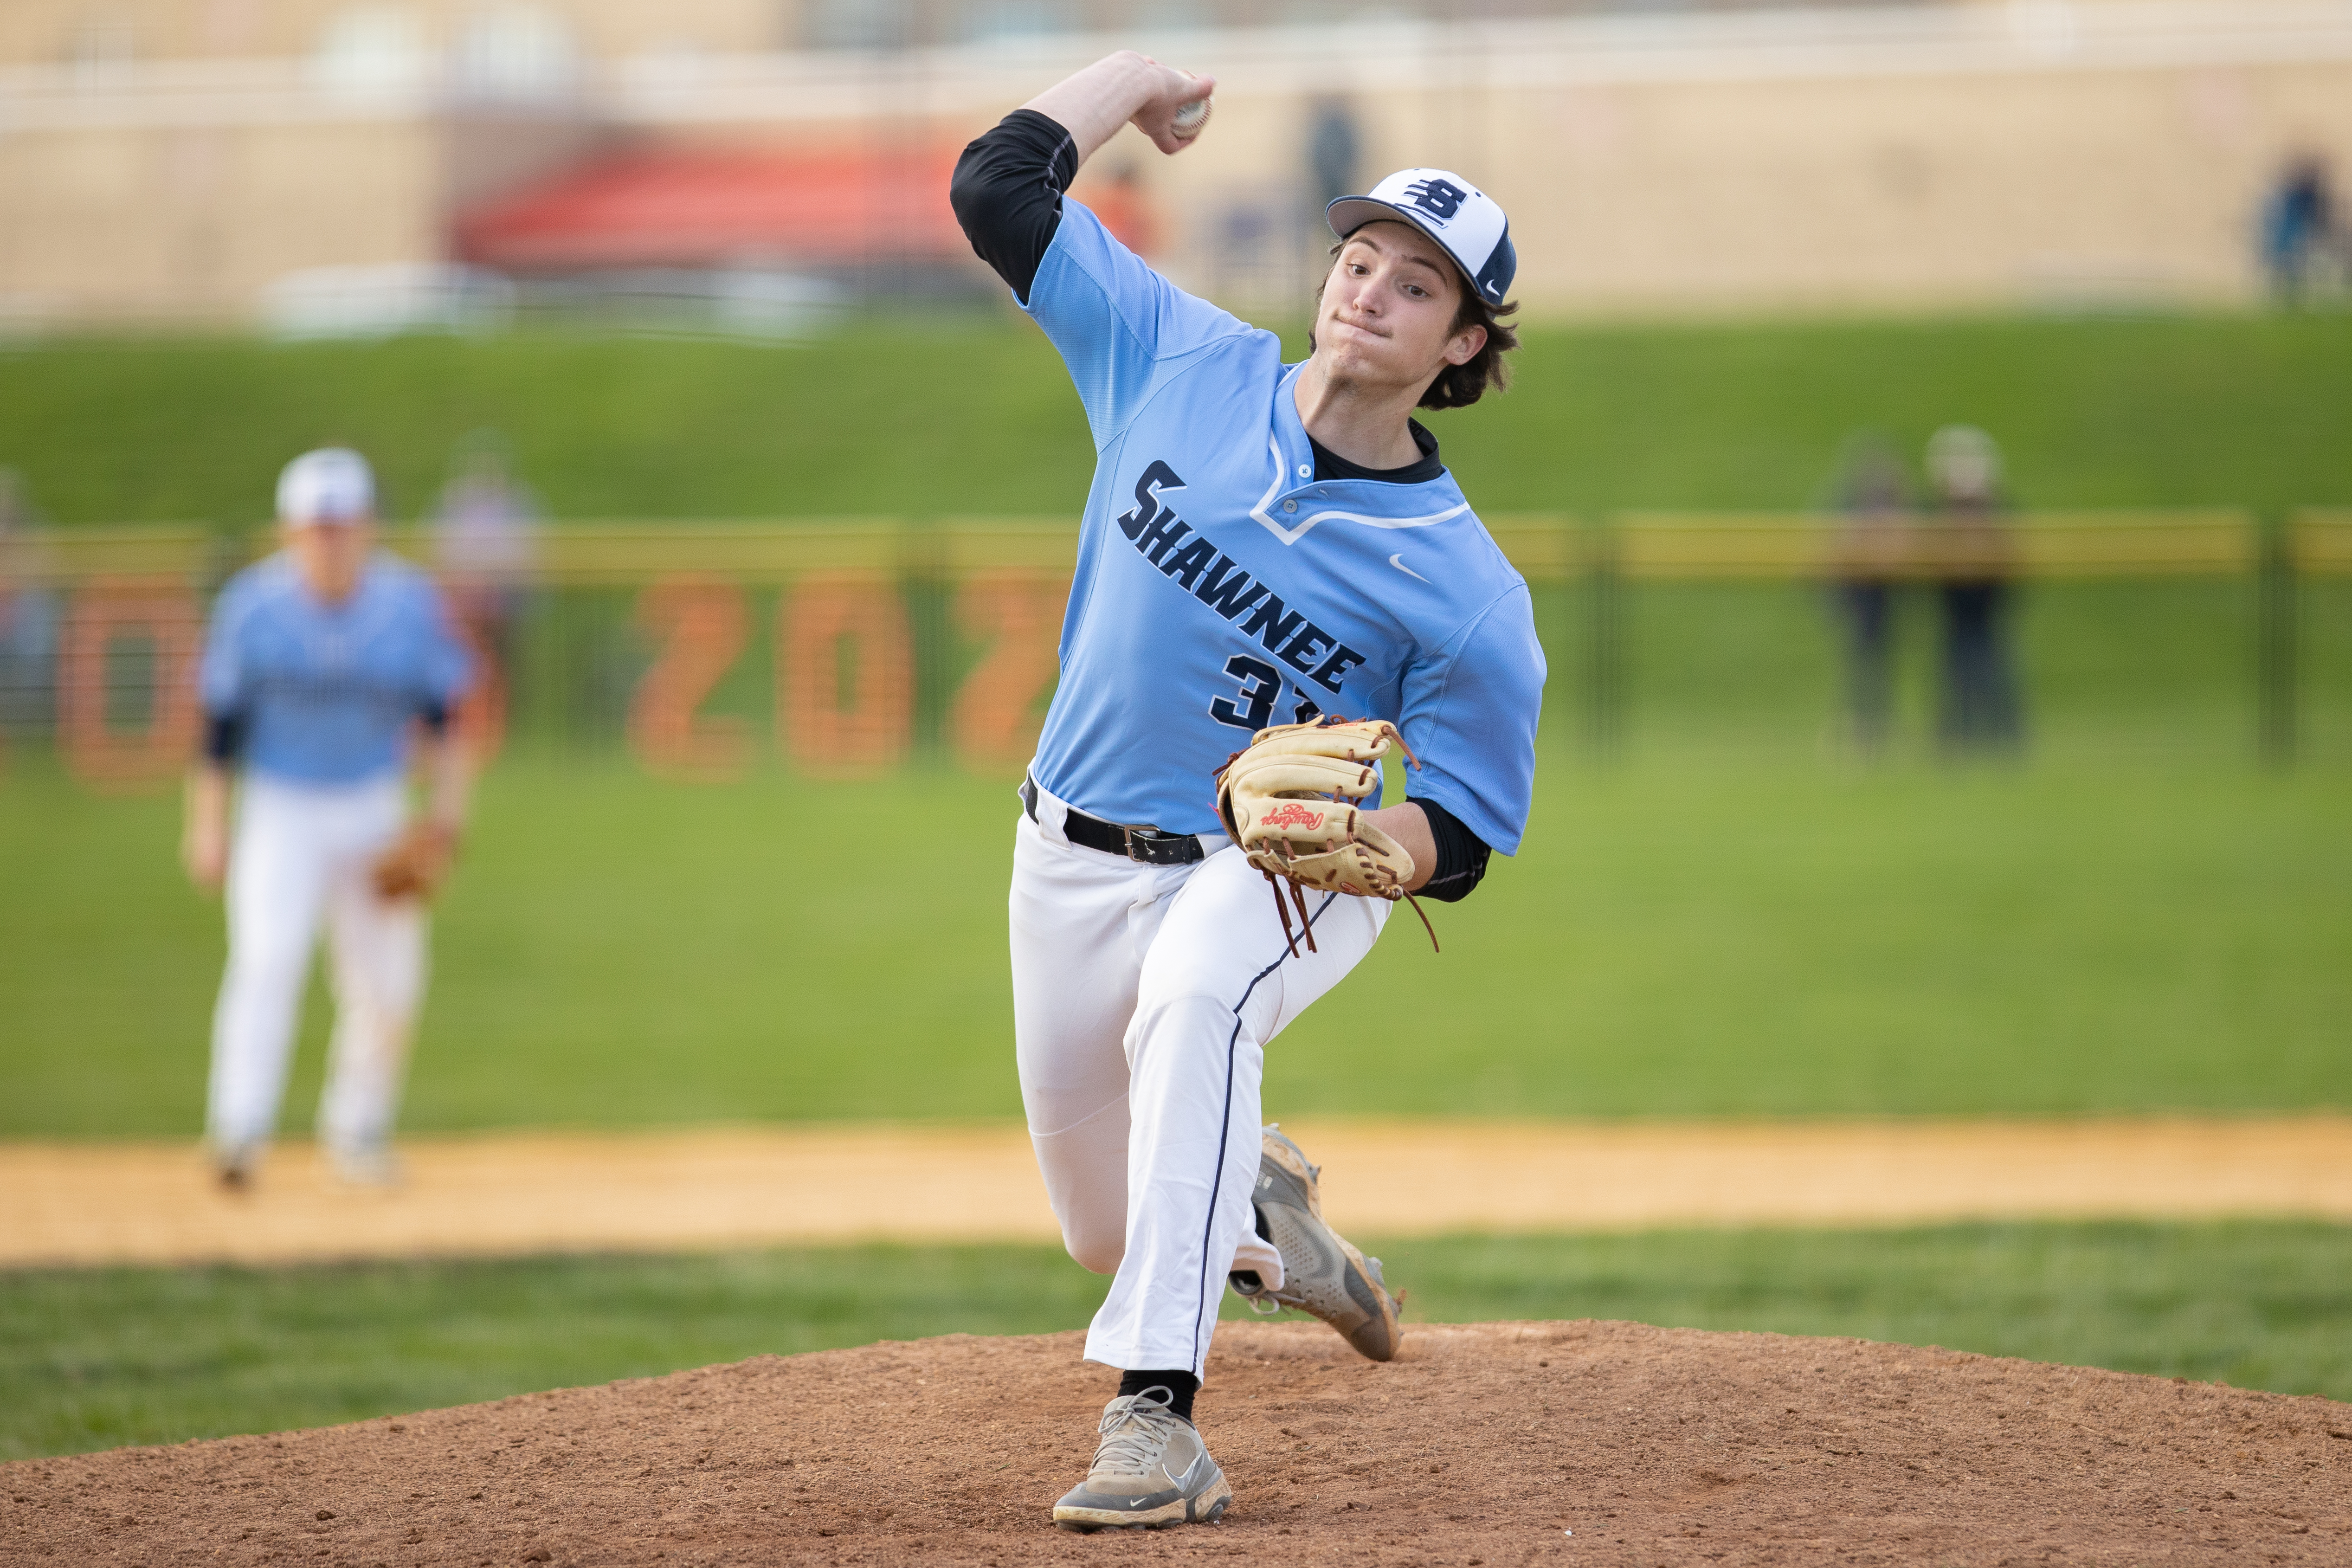 Liam Kennealy (31) of Shawnee, pitches in Marlton, NJ on Monday, April 3, 2023.